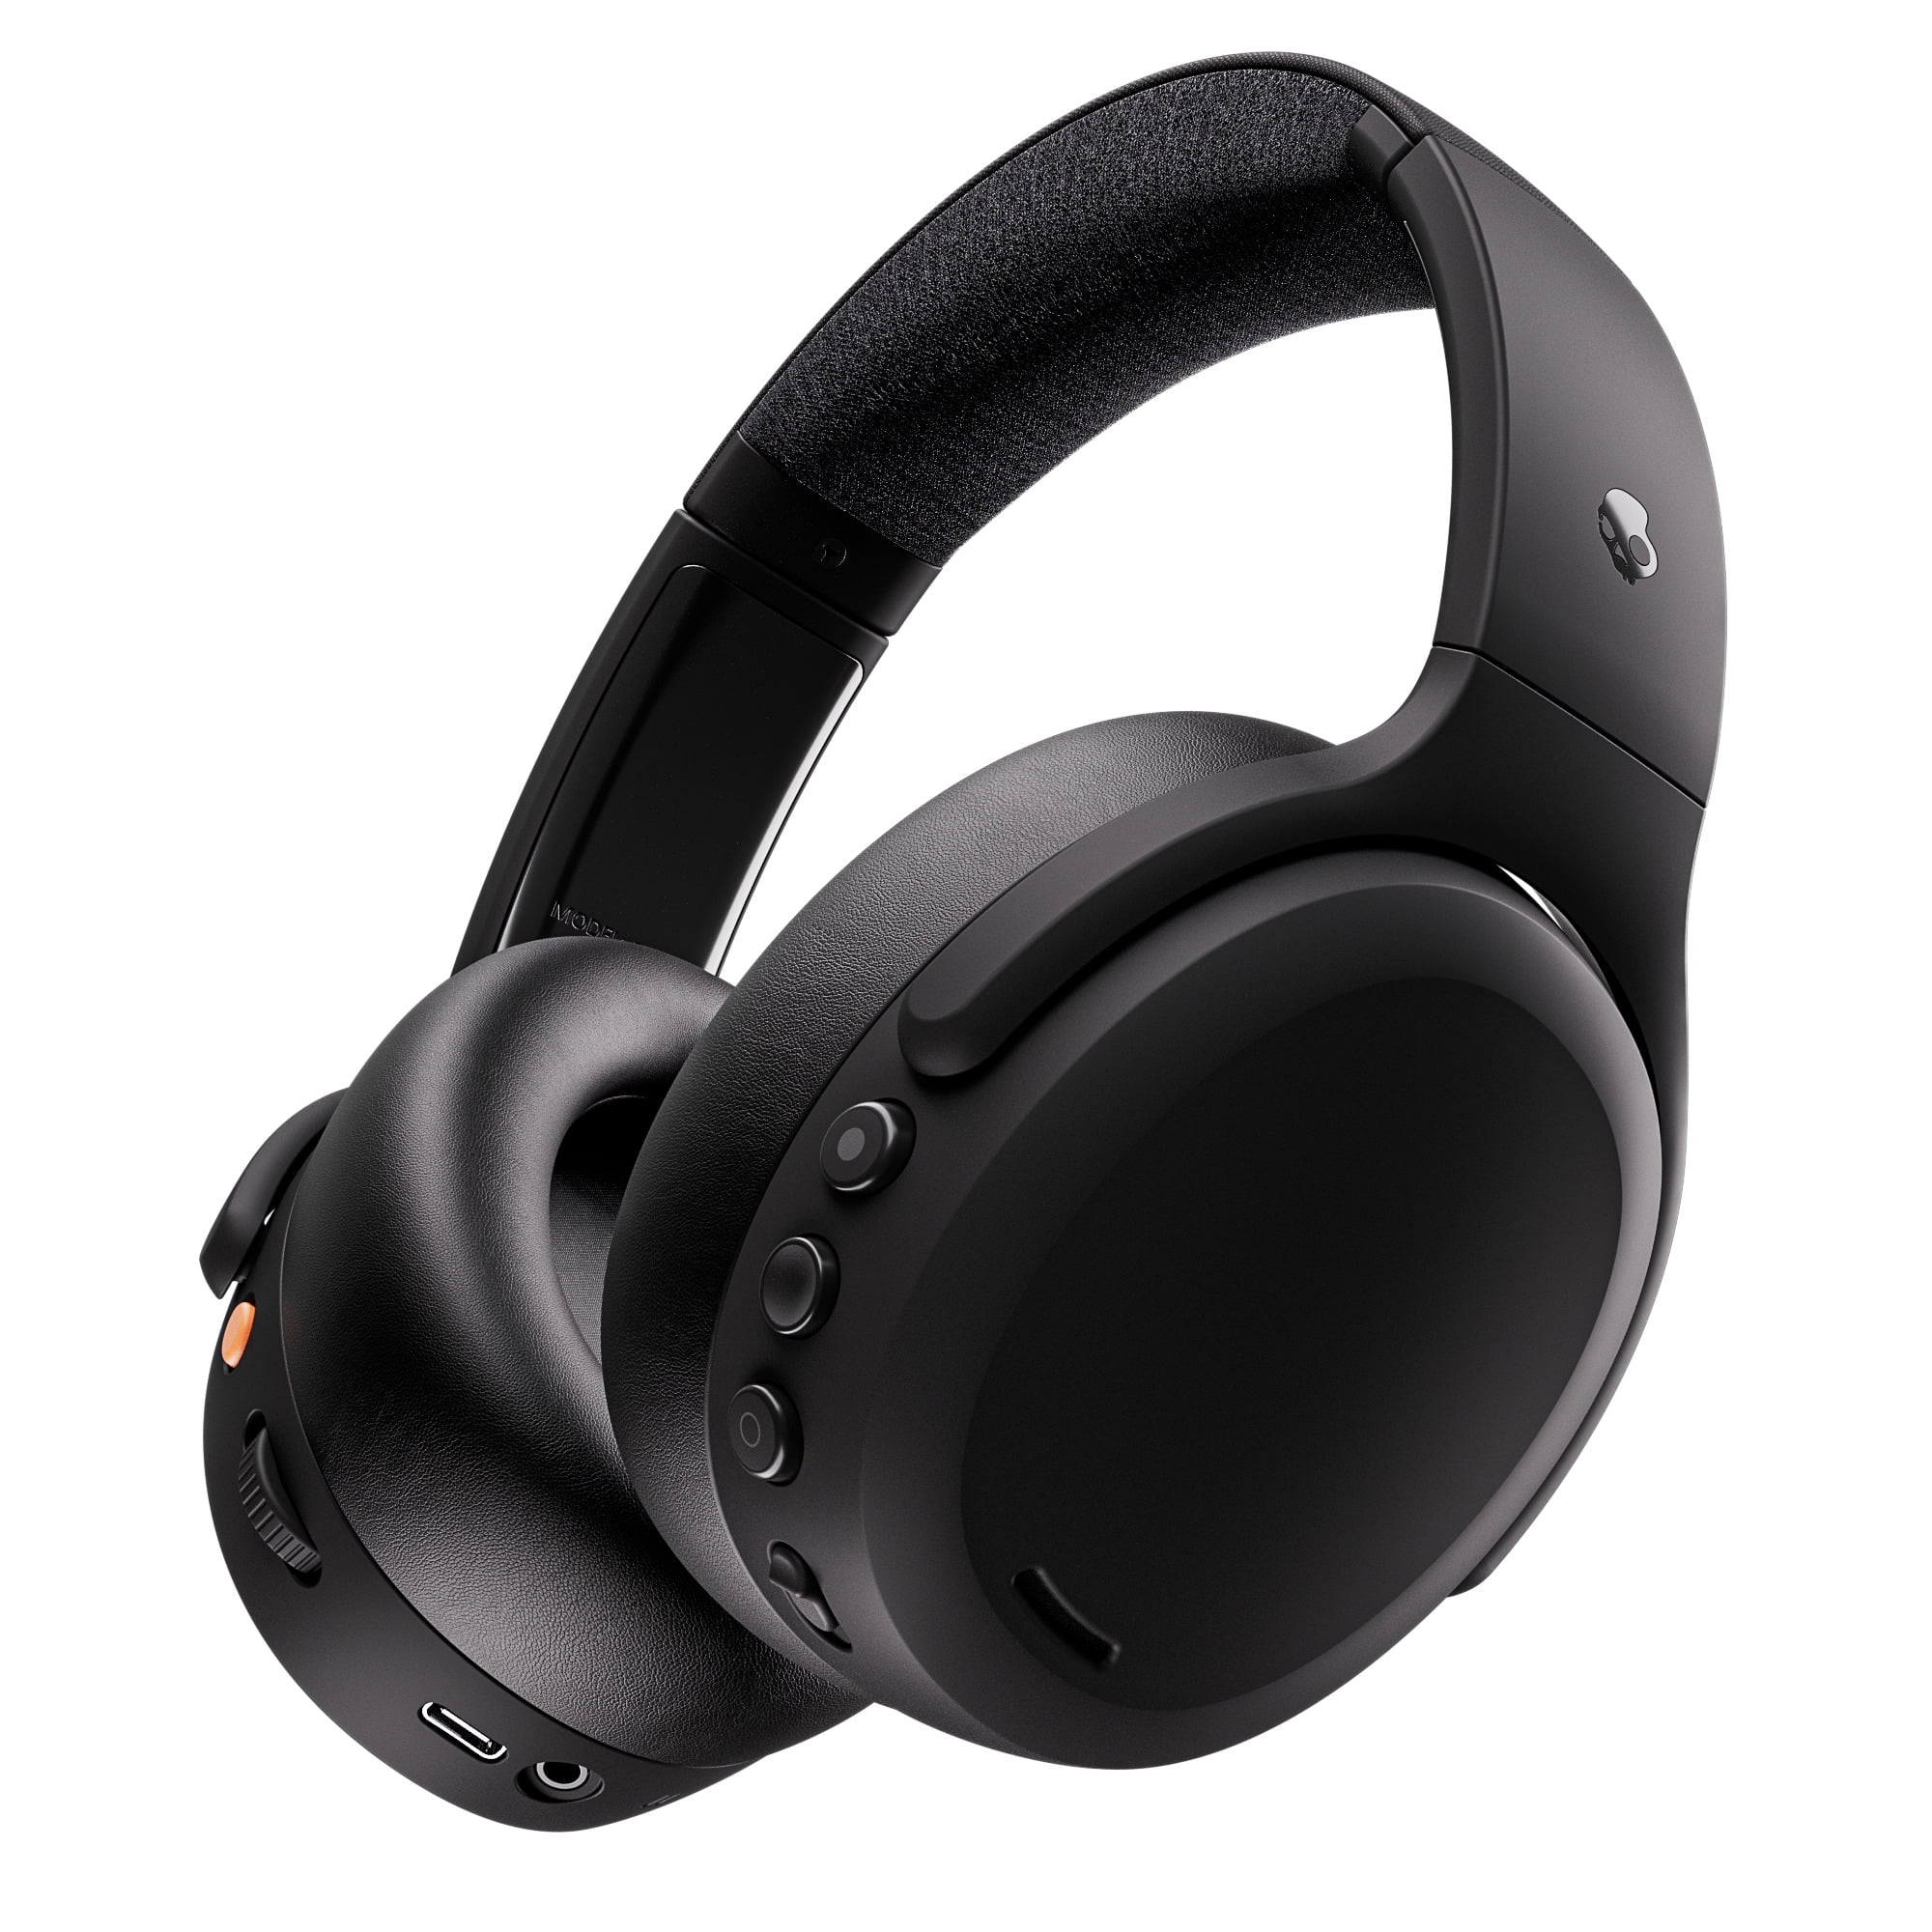  Skullcandy Crusher Over-Ear Wireless Headphones - Black  (Discontinued by Manufacturer) : Electronics